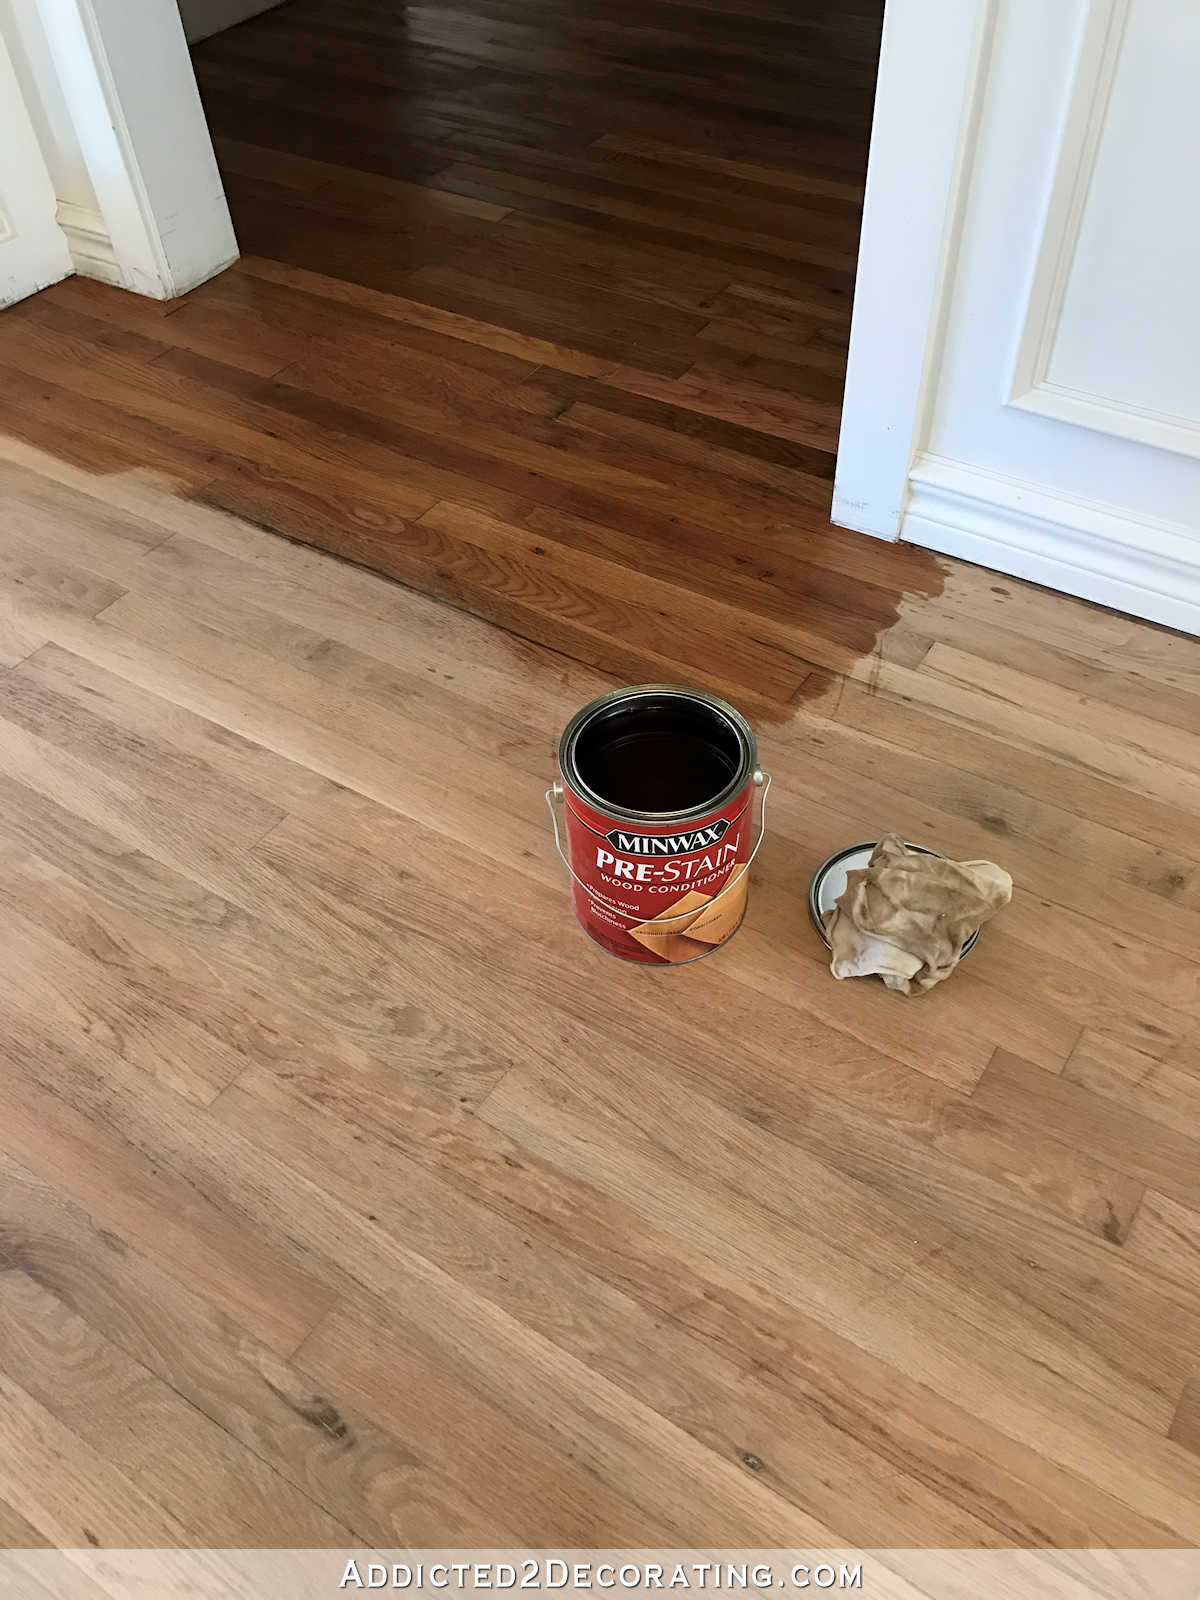 hardwood floor sanding companies of adventures in staining my red oak hardwood floors products process regarding staining red oak hardwood floors 1 conditioning the wood with minwax pre stain